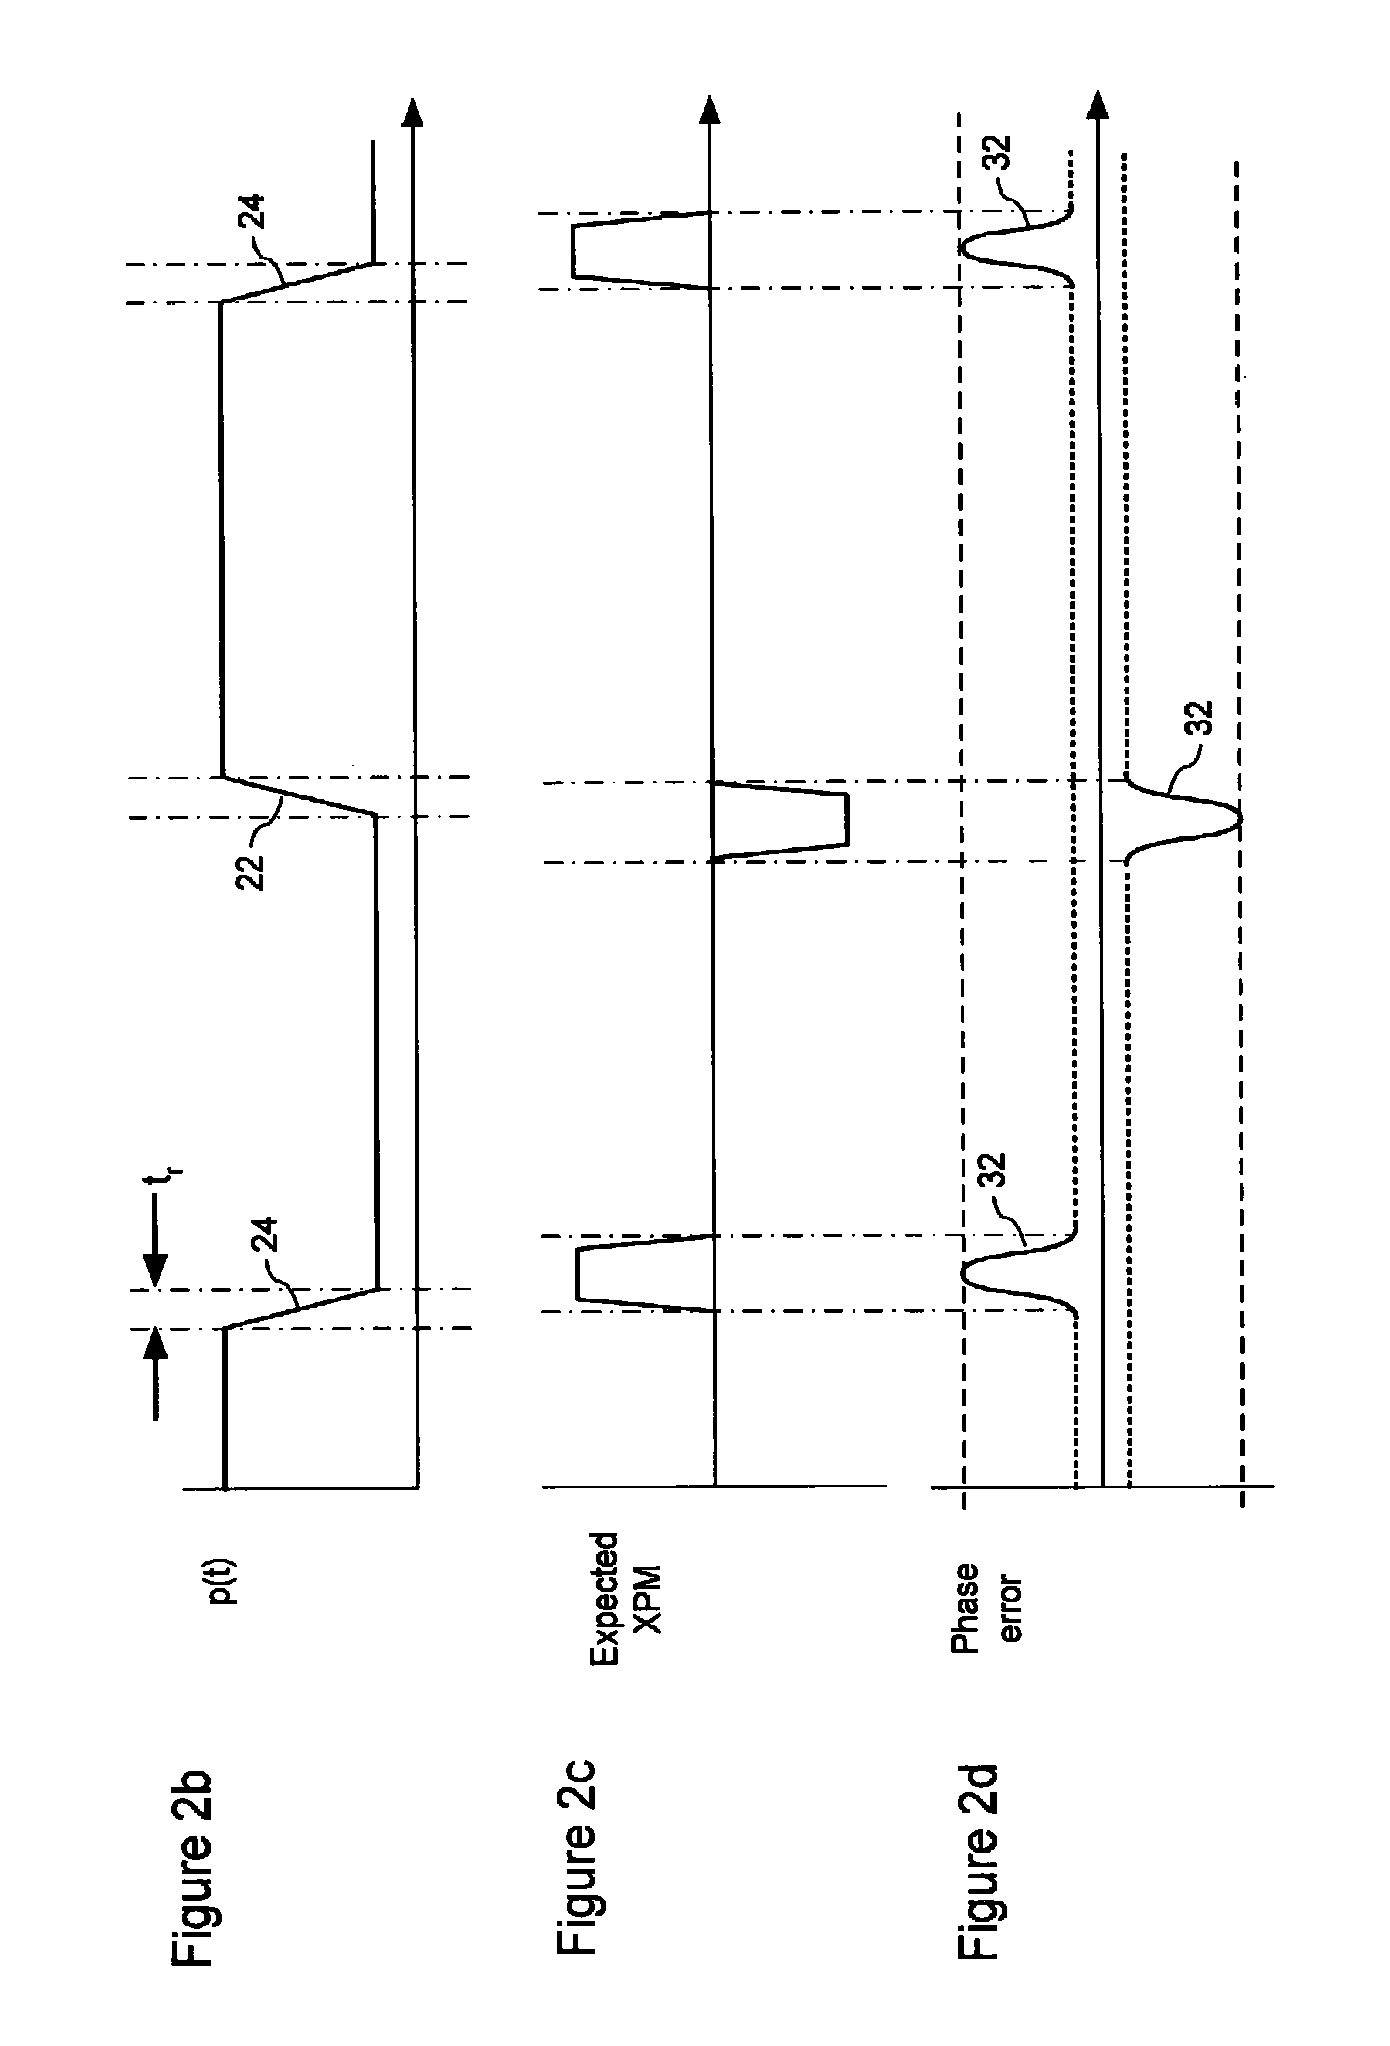 Monitoring phase non-linearities in an optical communication system